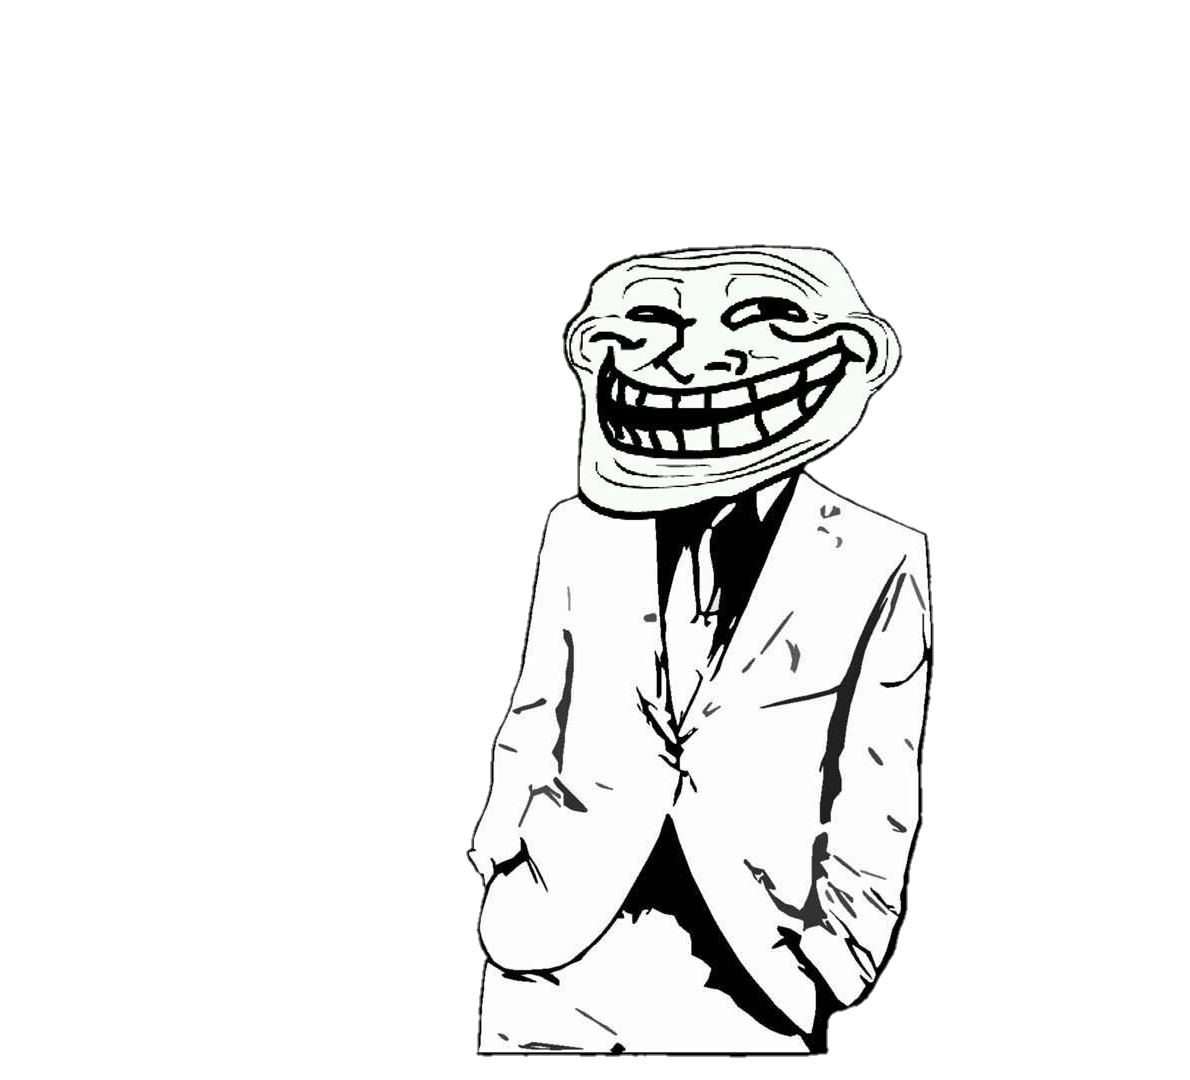 trollface-png-from-pngfre-17